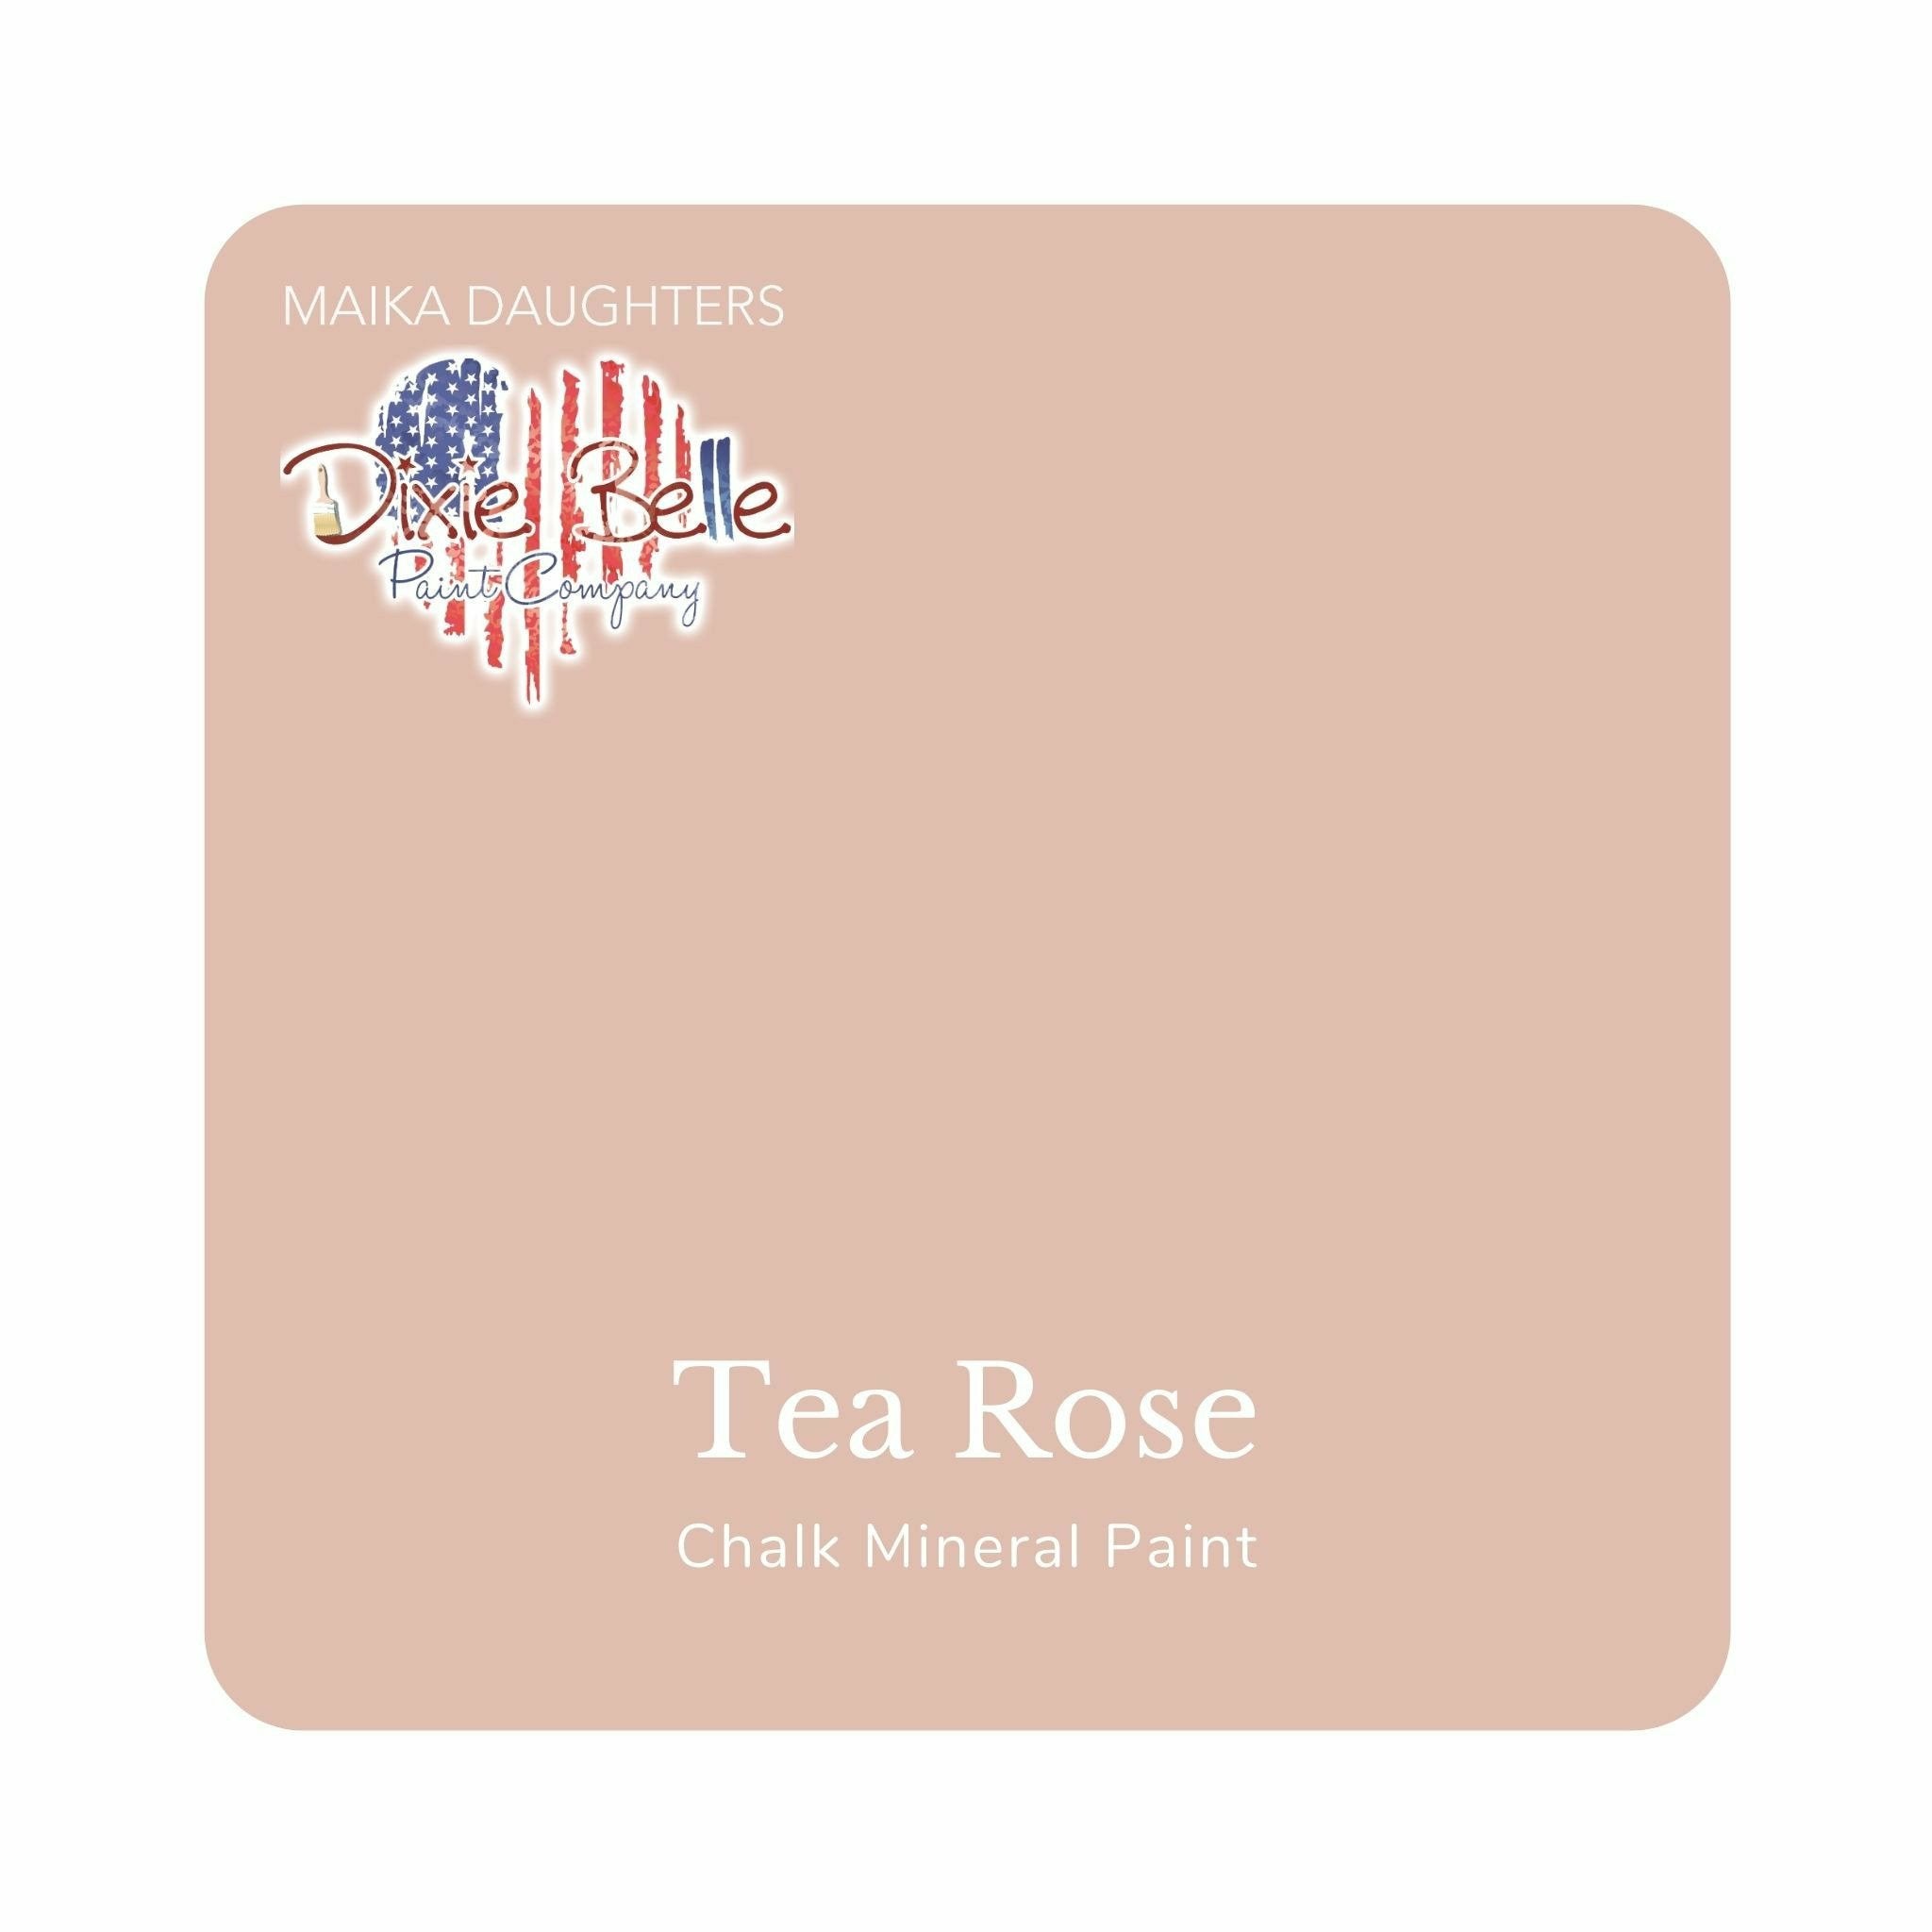 A square swatch card of Dixie Belle Paint Company’s Tea Rose Chalk Mineral Paint is against a white background. This color is a soft pink with a gray undertone.